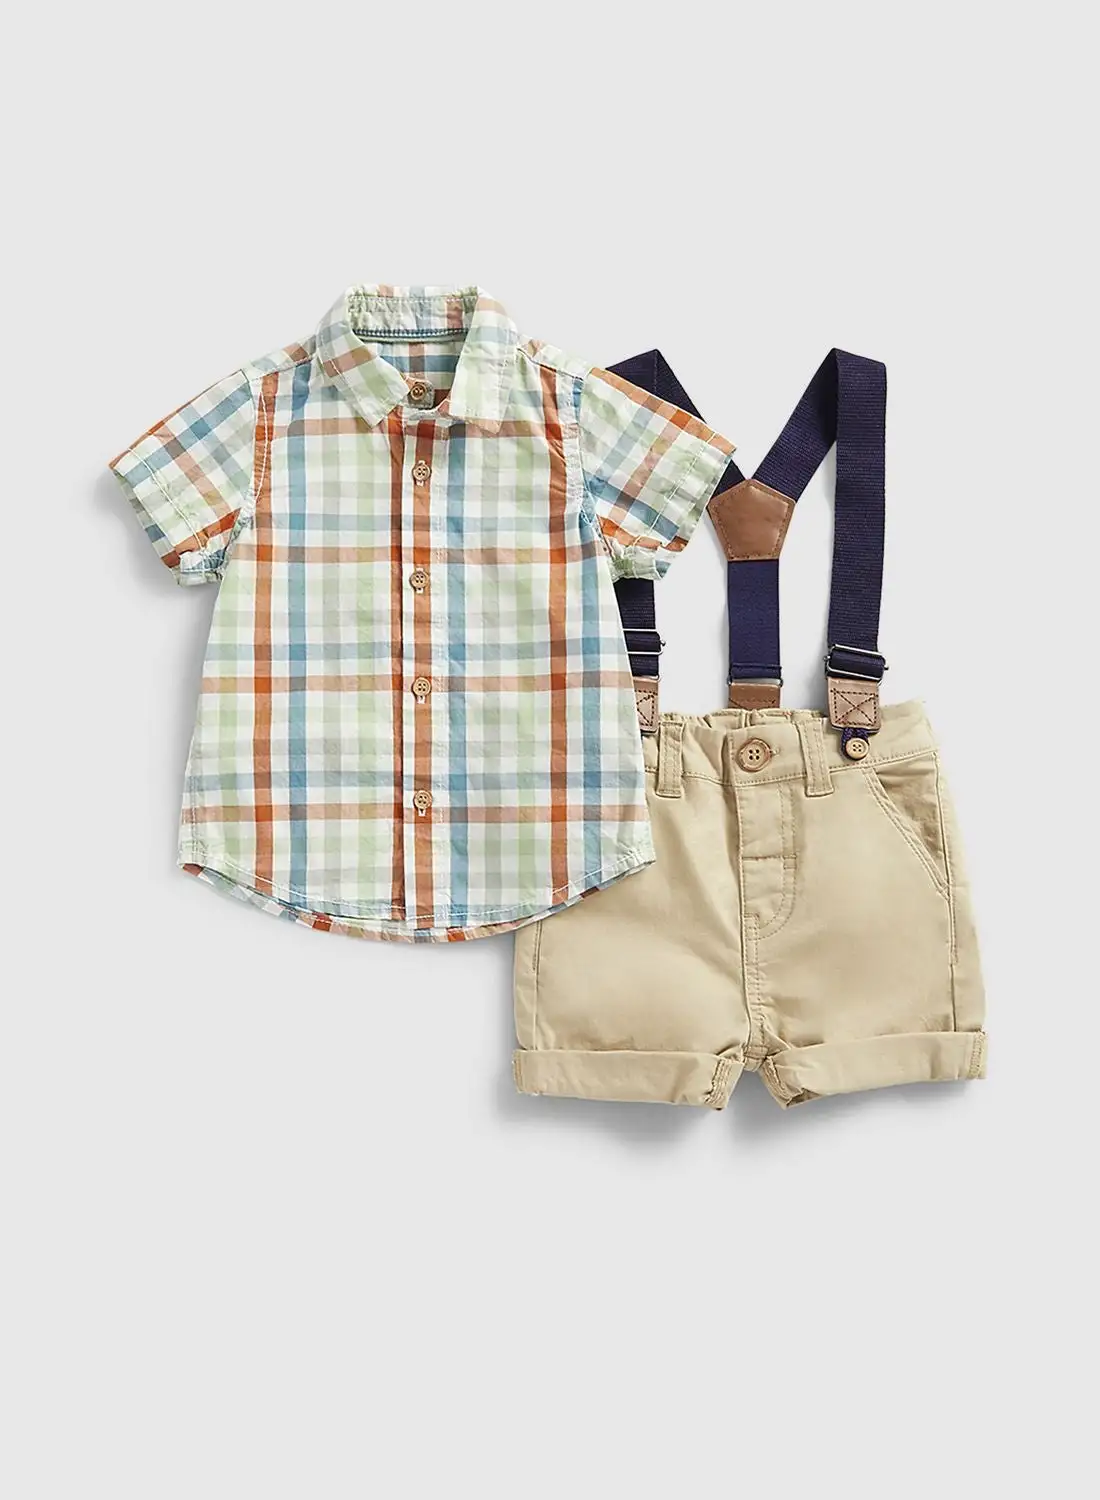 mothercare Kids Essential Shirt & Shorts With Braces Set